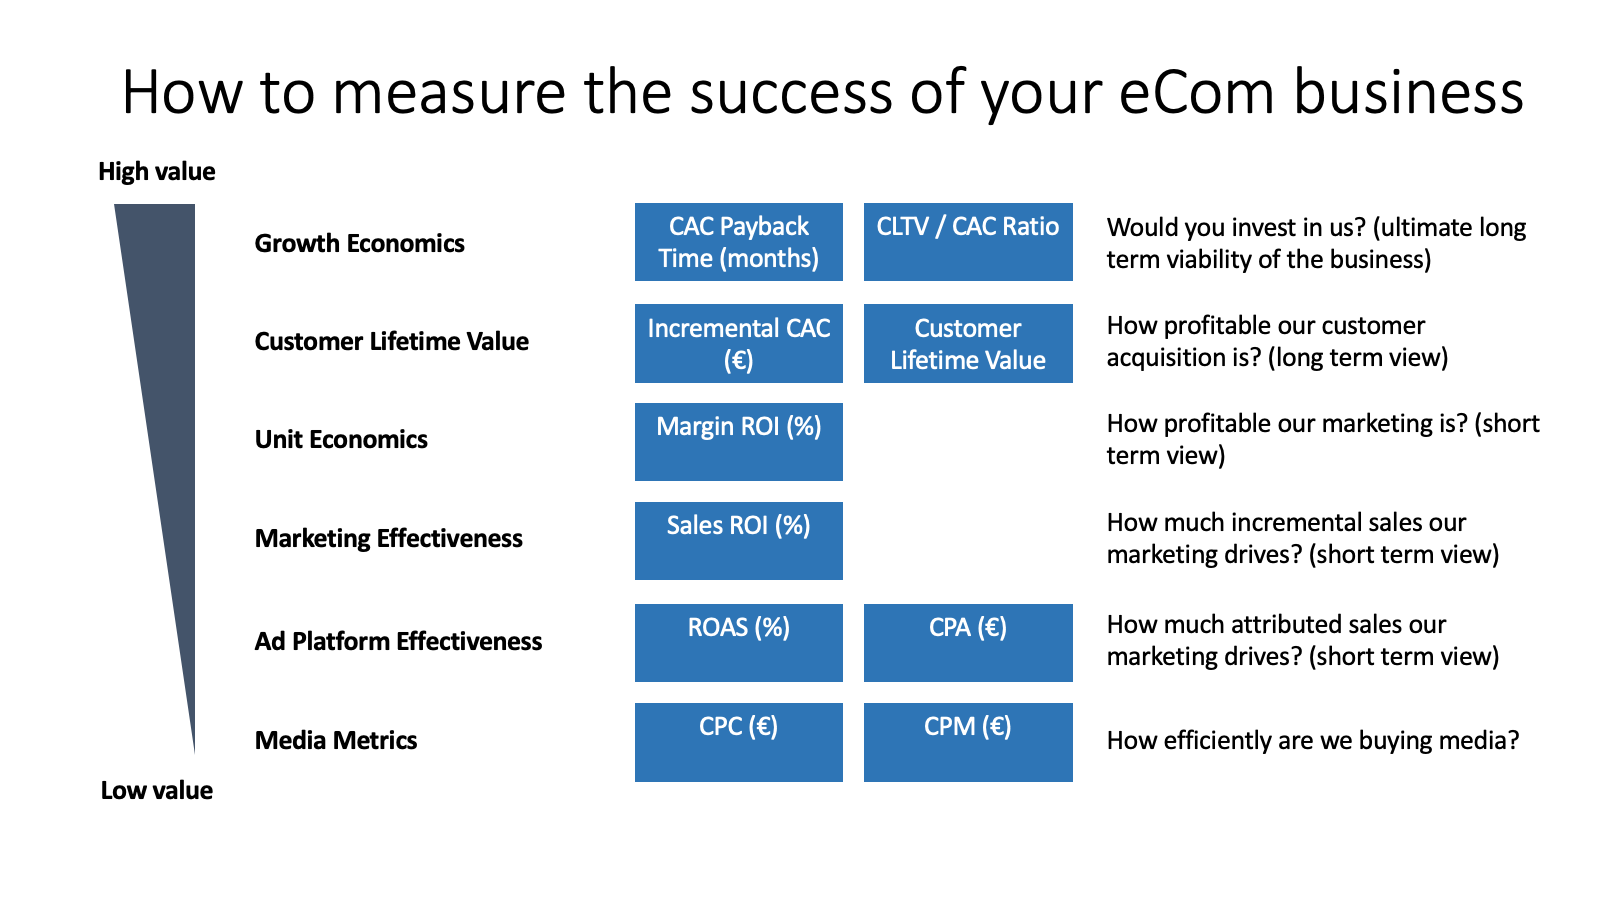 How to measure the success of your eCom business